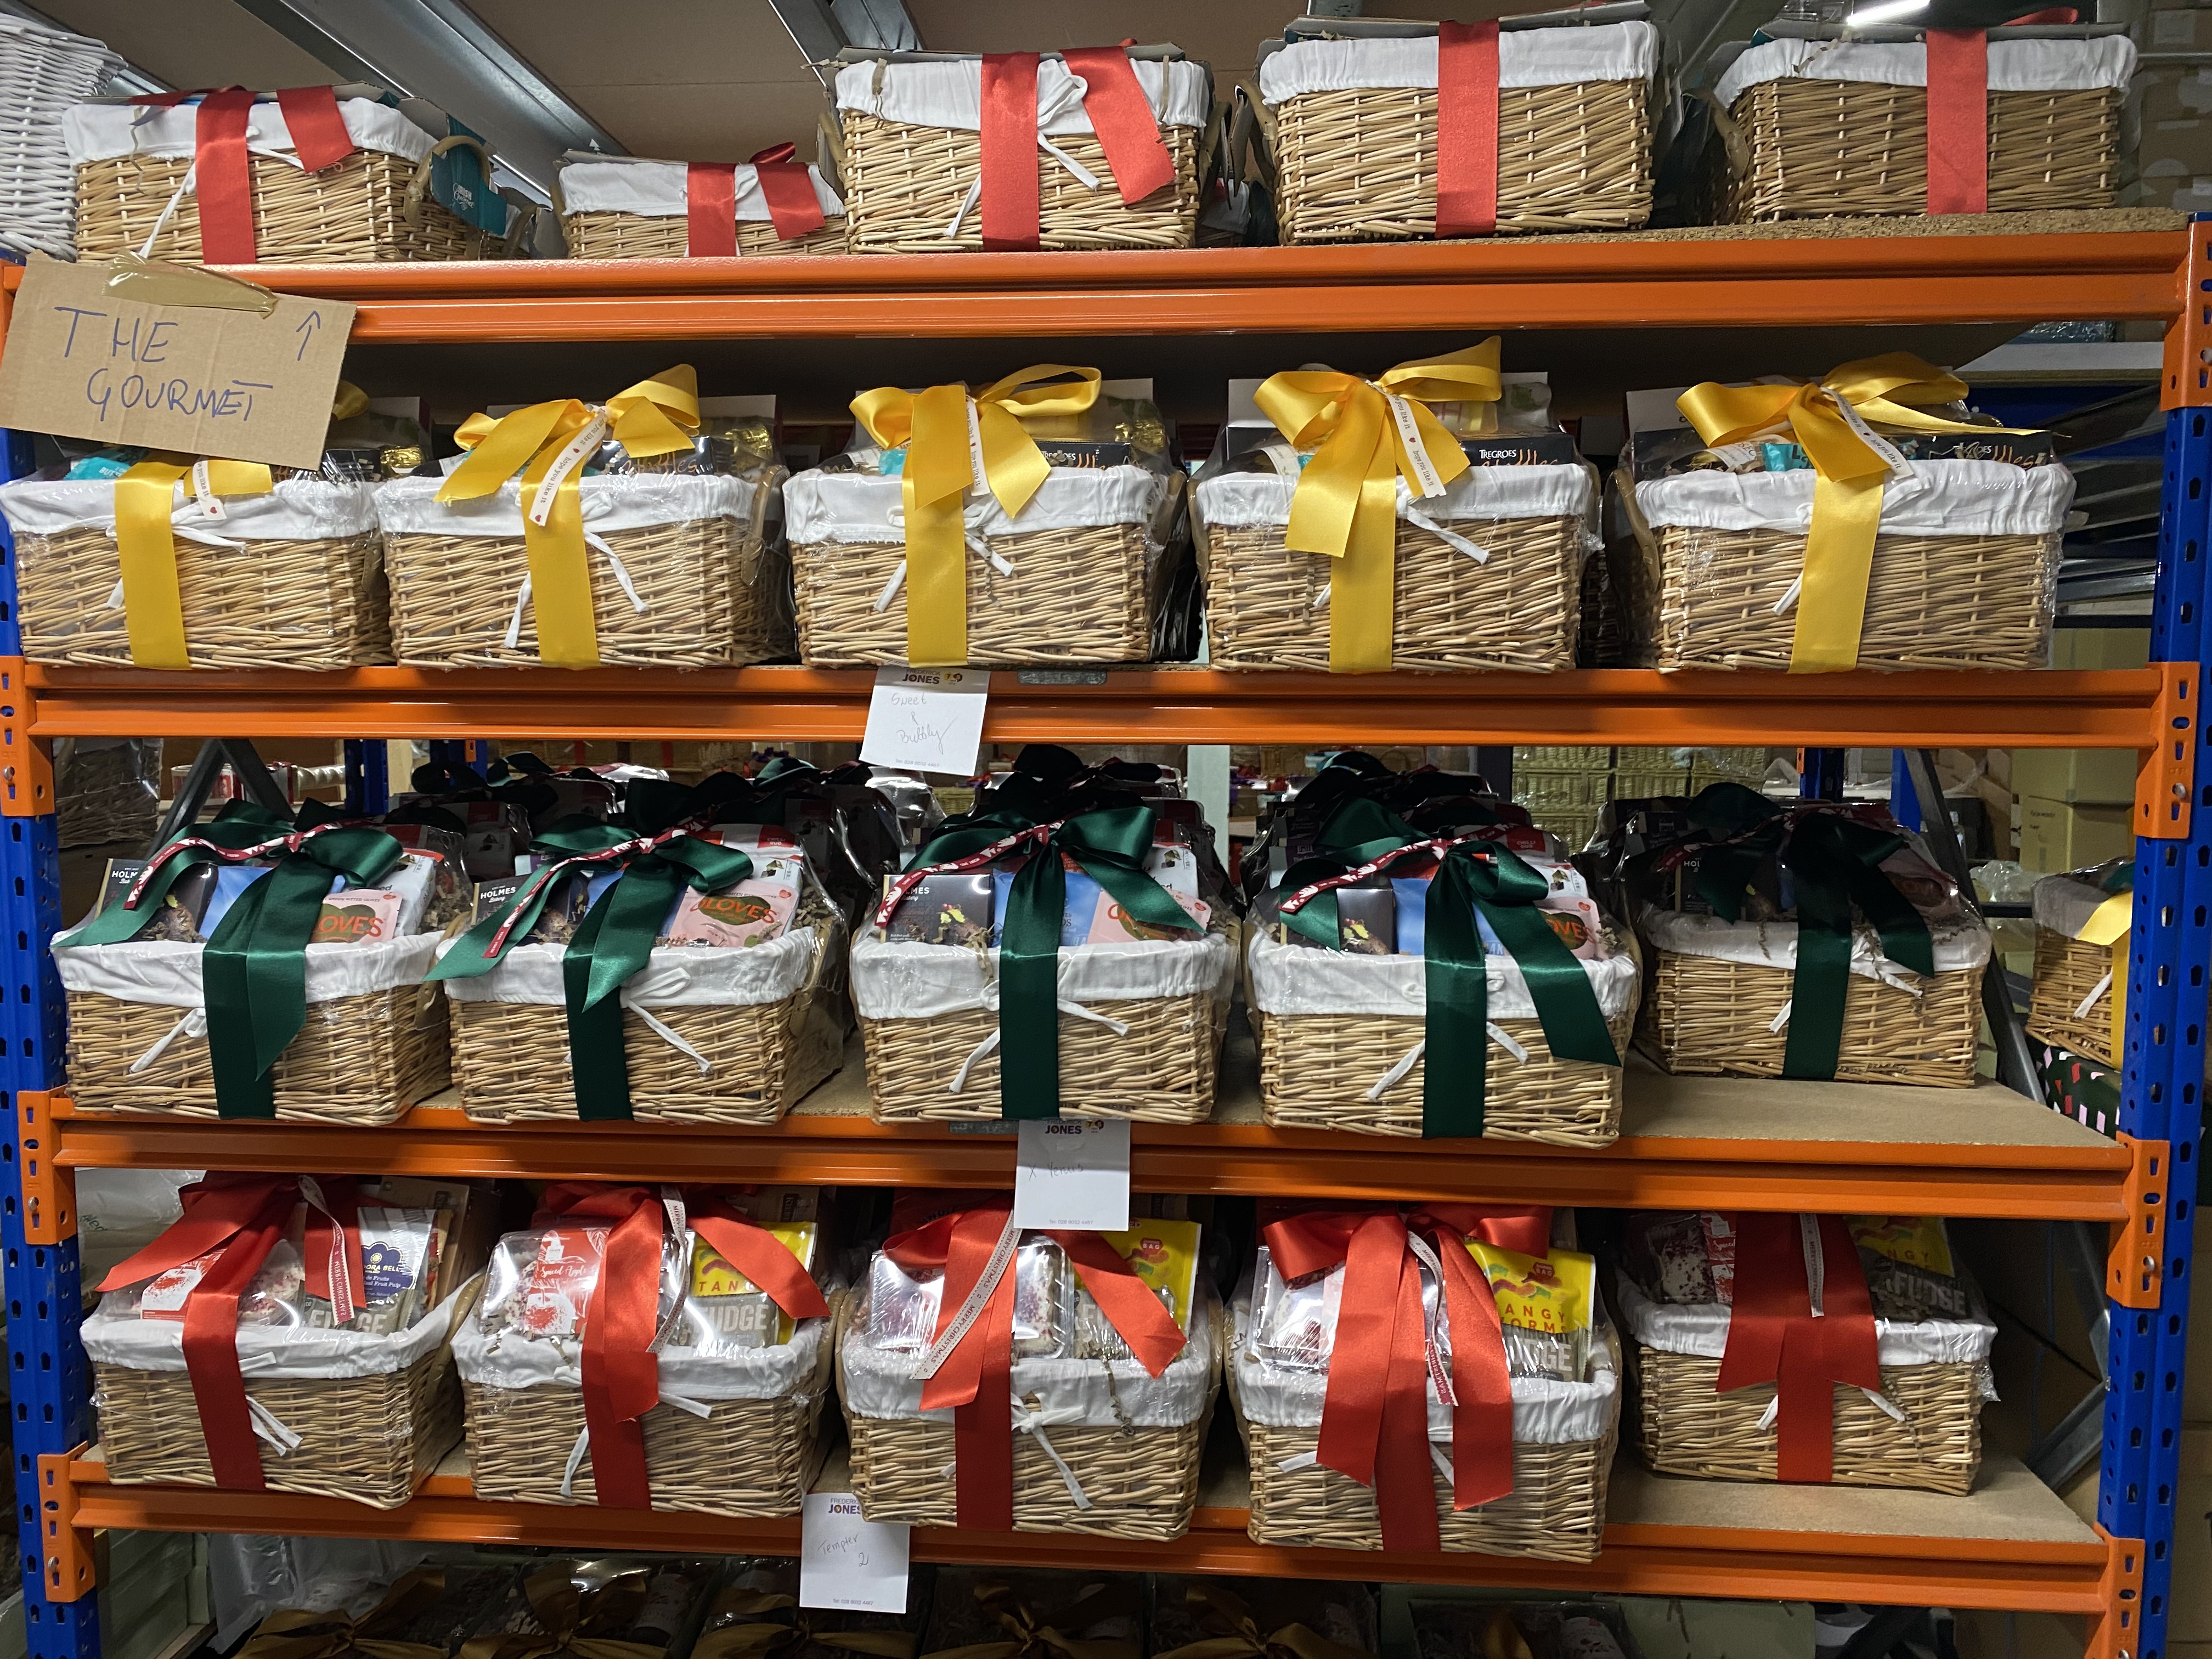 Professional Gift Baskets on rack